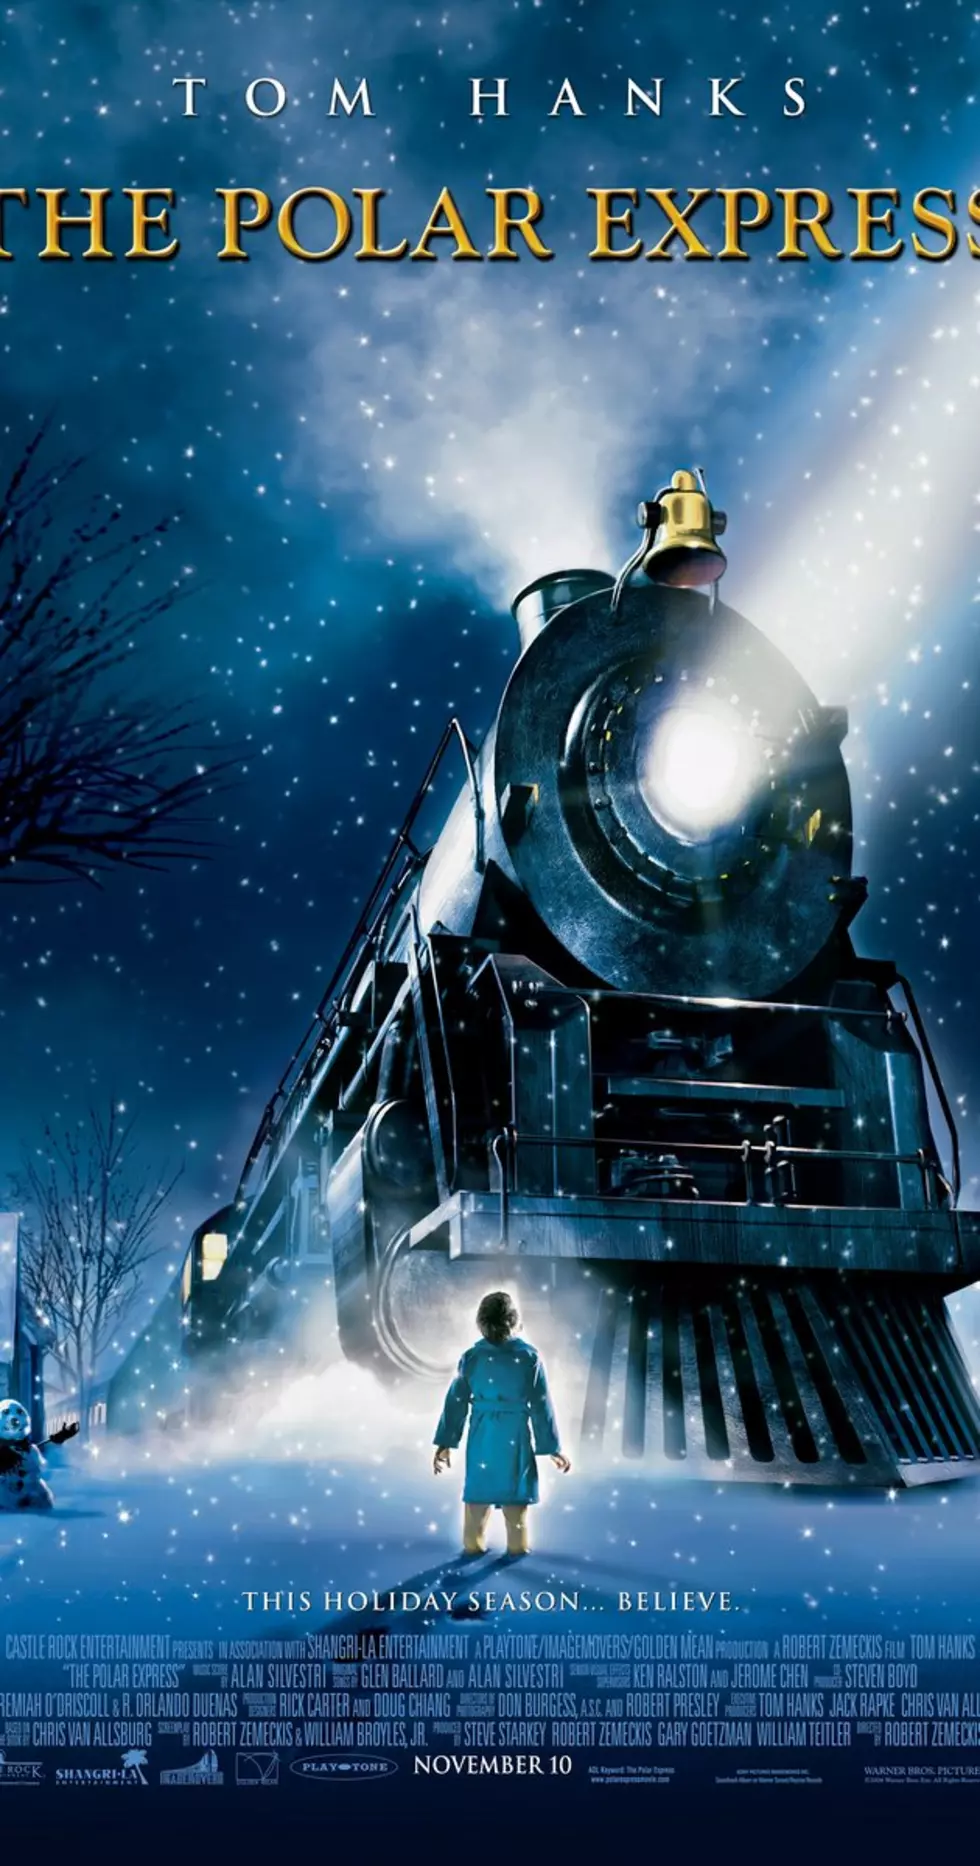 &#8216;The Polar Express&#8217; Movie Screening Coming Up at Mae Simmons Center